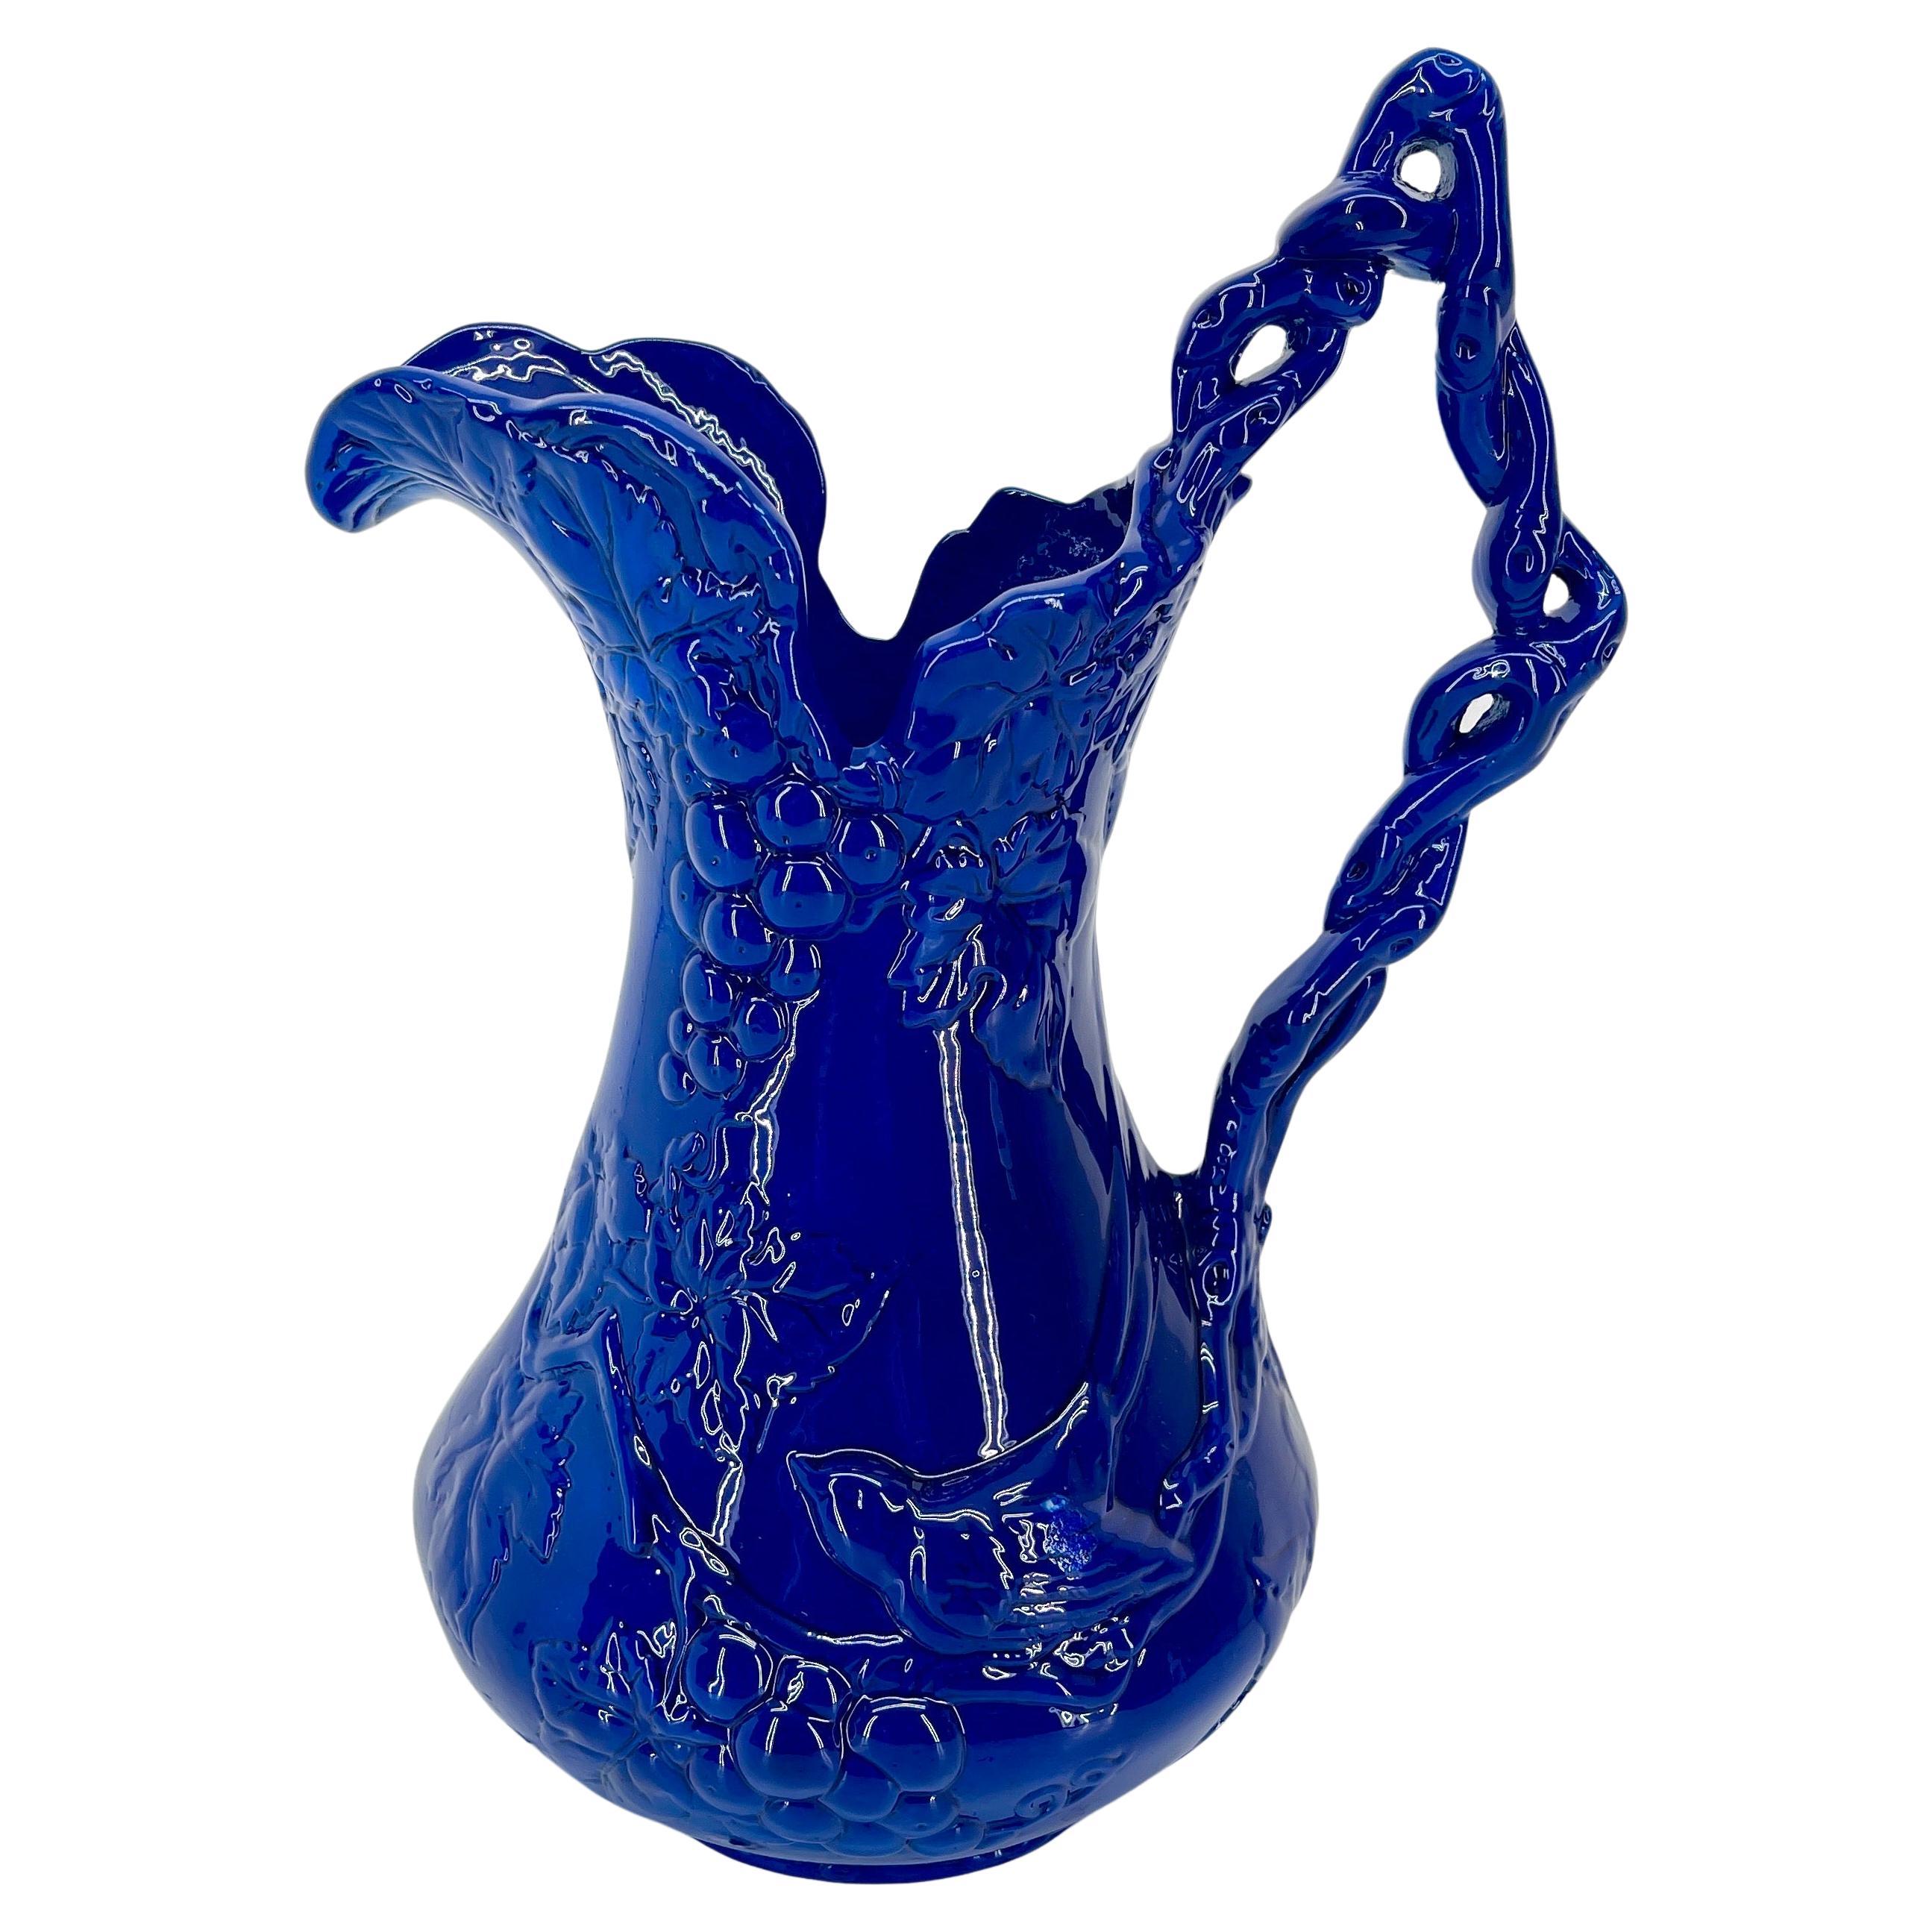 Powder-Coated Bird and Grapevines Blue Sculptured Pitcher from Arthur Court

This one of kind freshly royal blue powder-coated cast aluminum braided handle pitcher with wonderful bird and grape motif. The work of Arthur Court is a constant delight